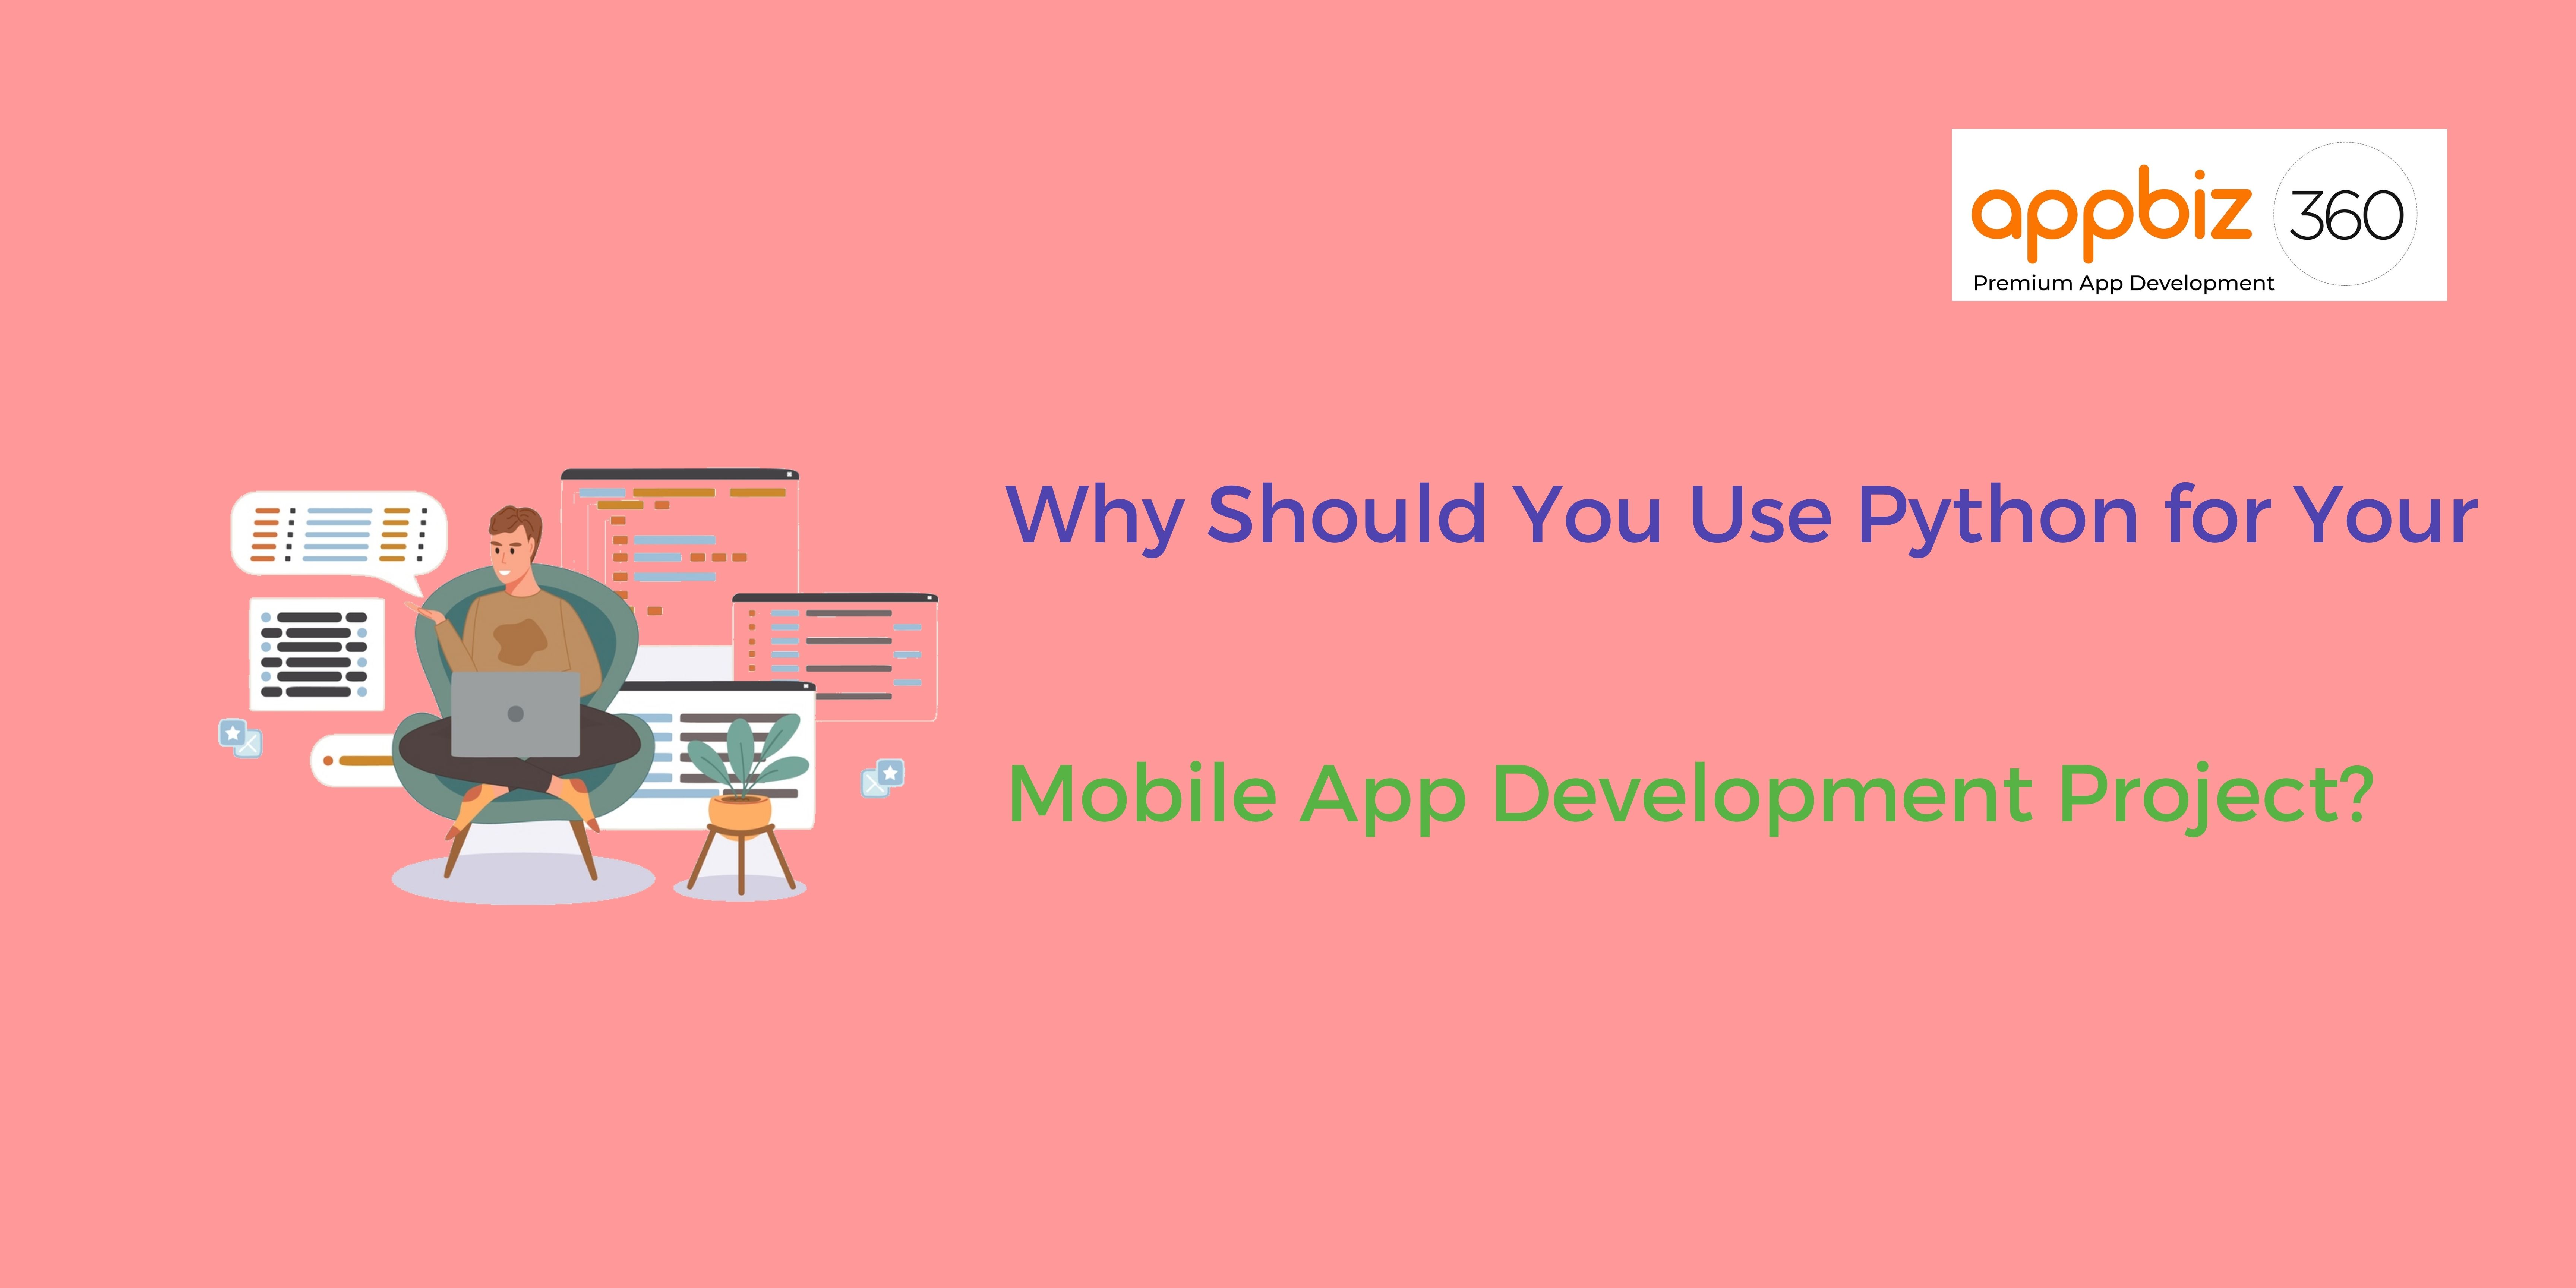 Building your brand image with iPad app development